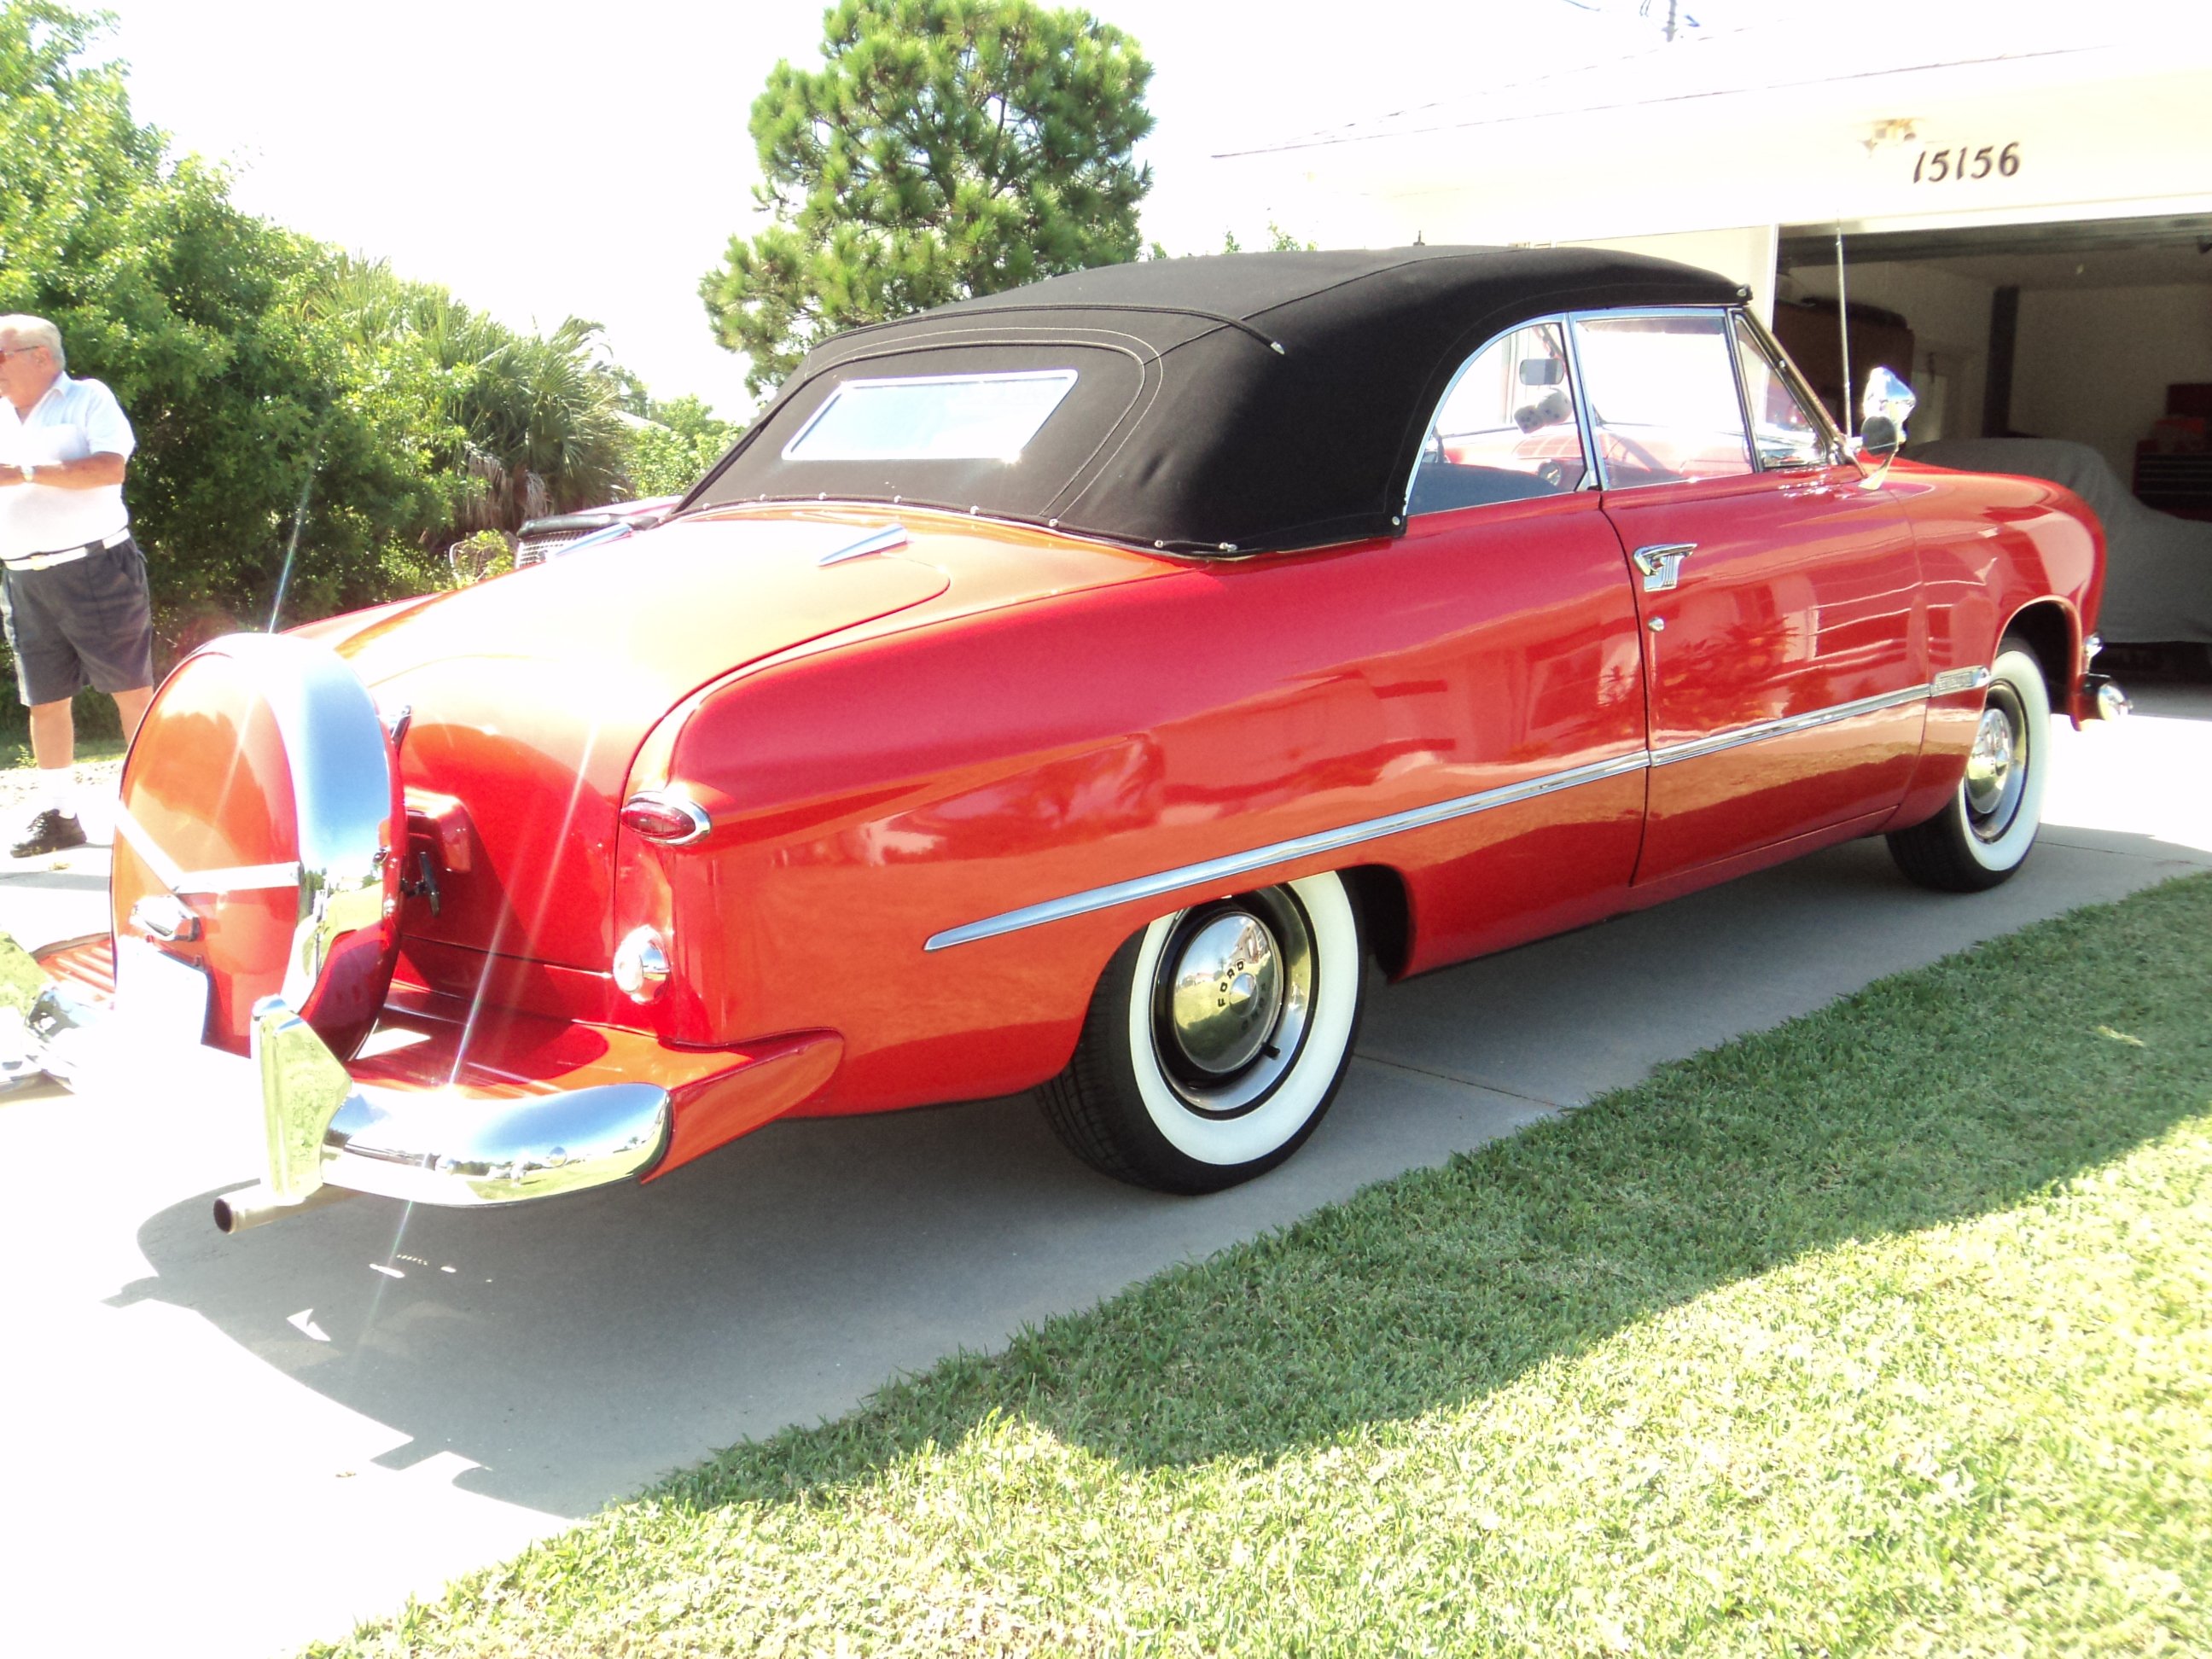 1950, Ford, Custonline, Deluxe, Convertible, Red, Classic, Old, Vintage, Original, Usa, 2592x1944 09 Wallpaper